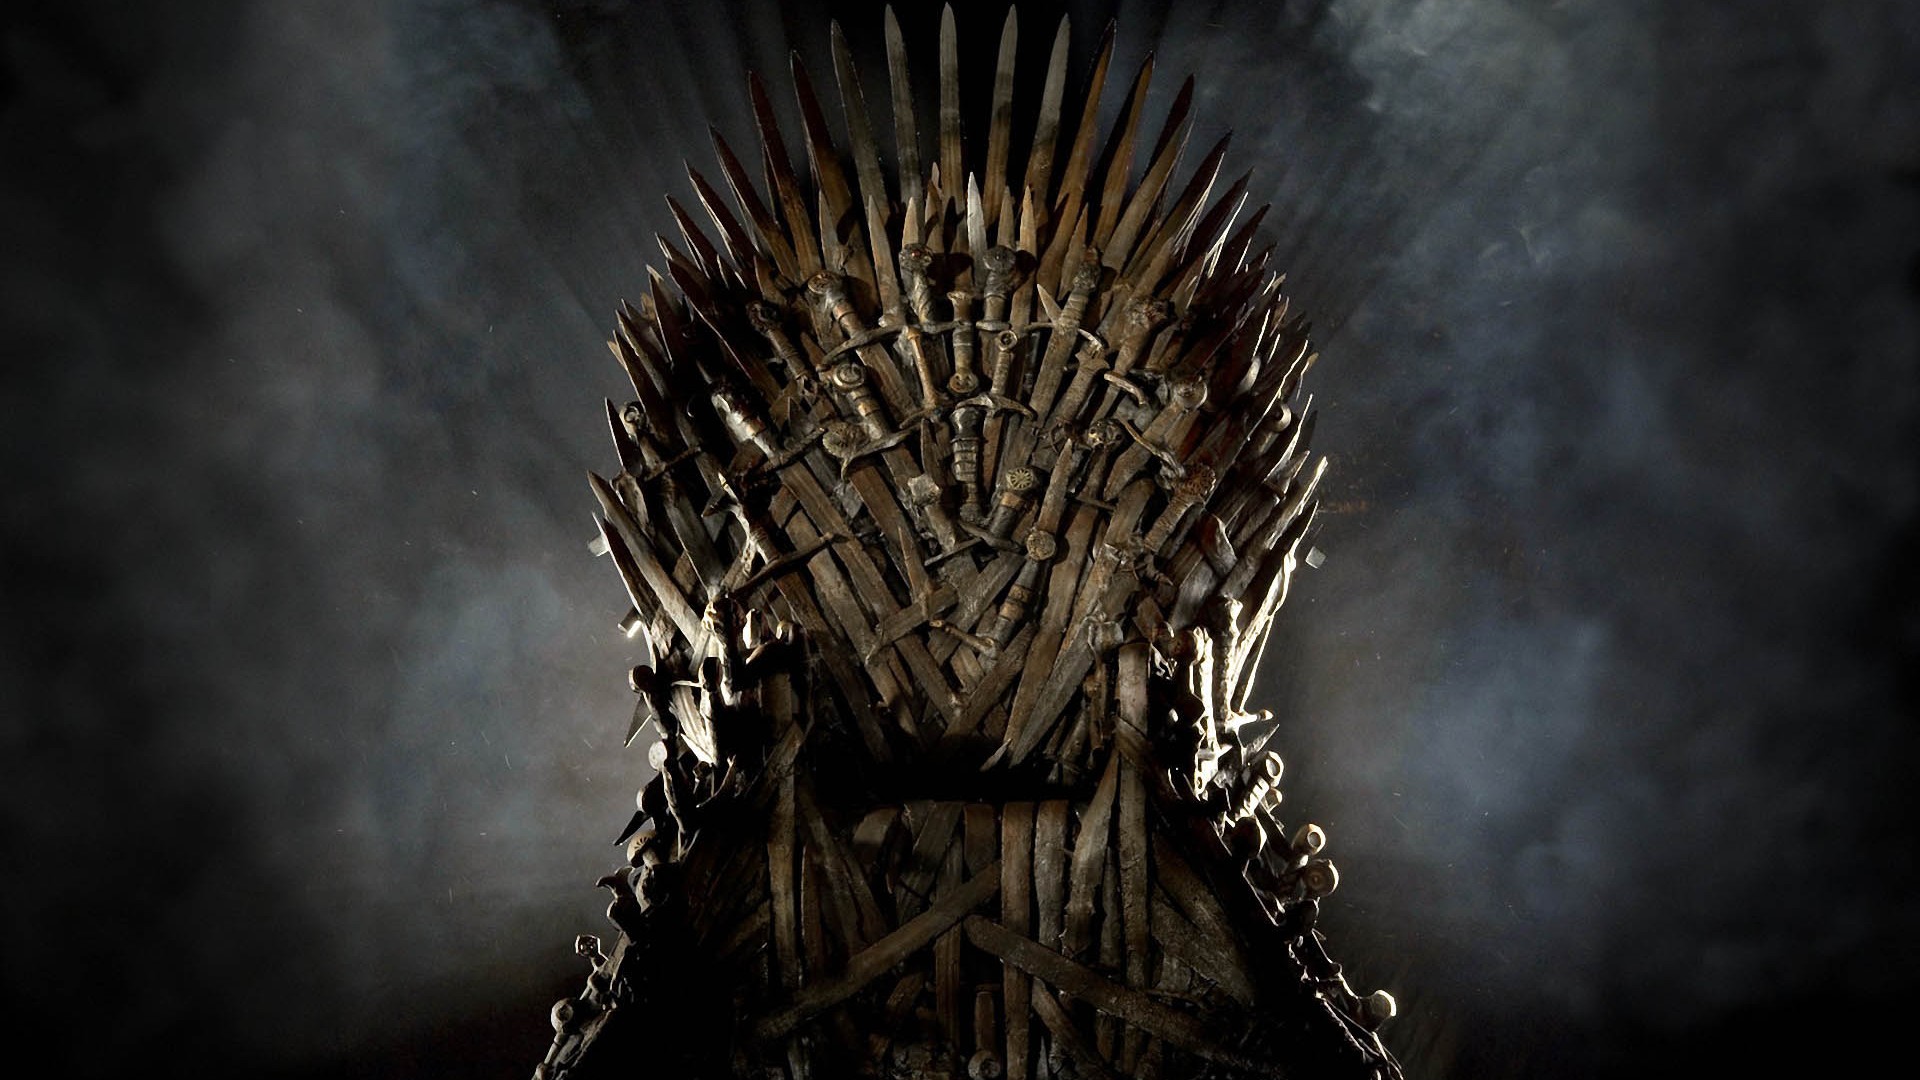 Game of Thrones Iron Throne Wallpaper   HD Wallpapers